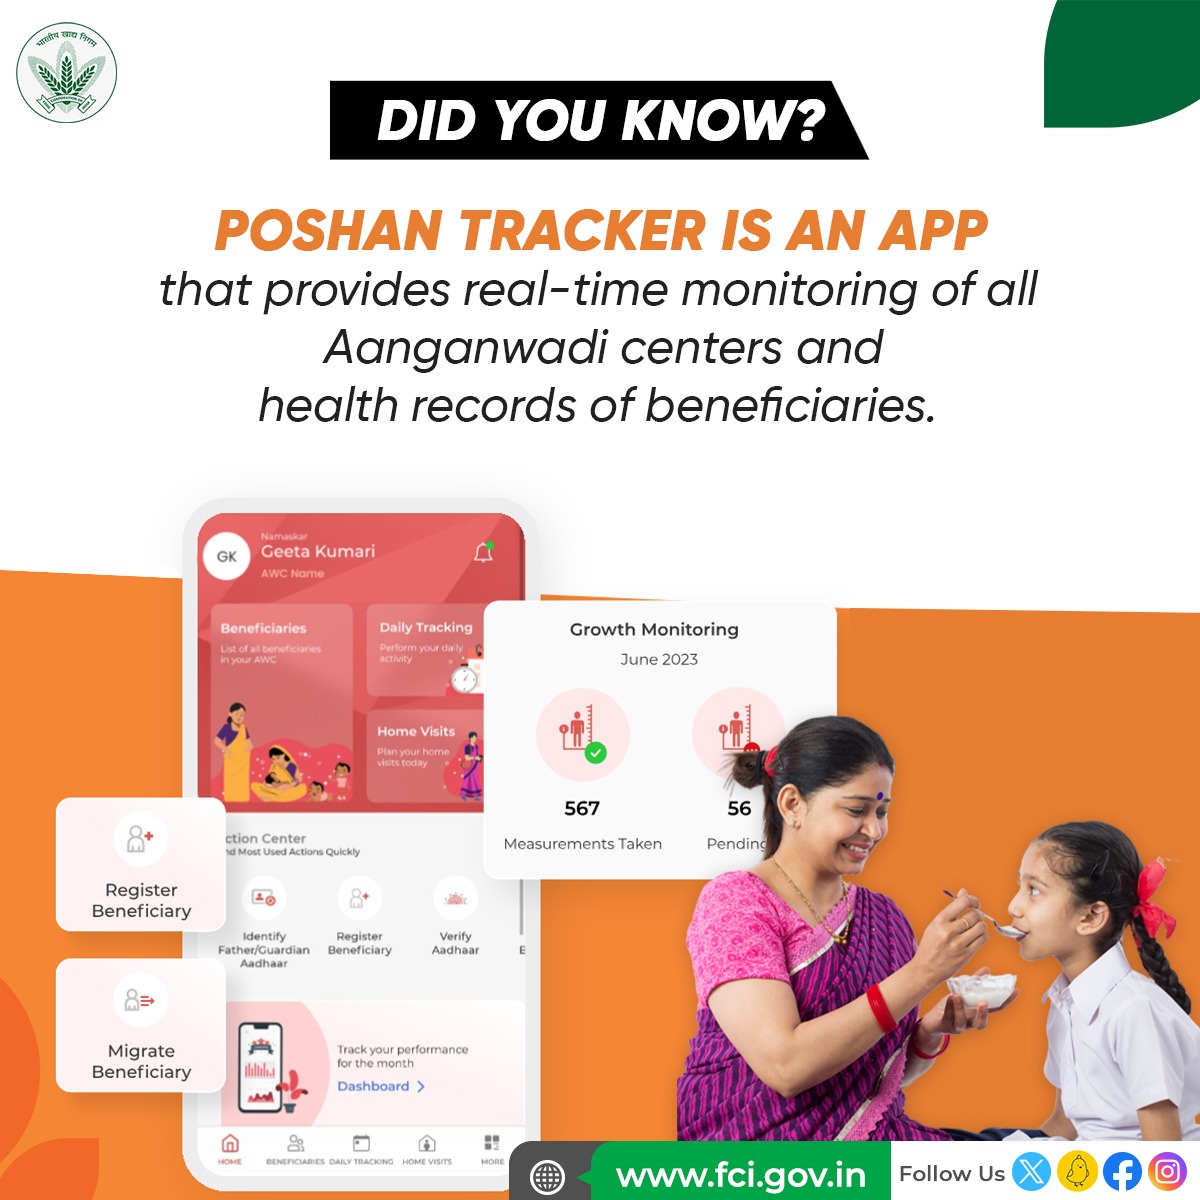 With Poshan Tracker, Anganwadi workers can track and improve the health of pregnant and lactating women, children and adolescents. The app collects and analyzes data on child growth and gives action tips.